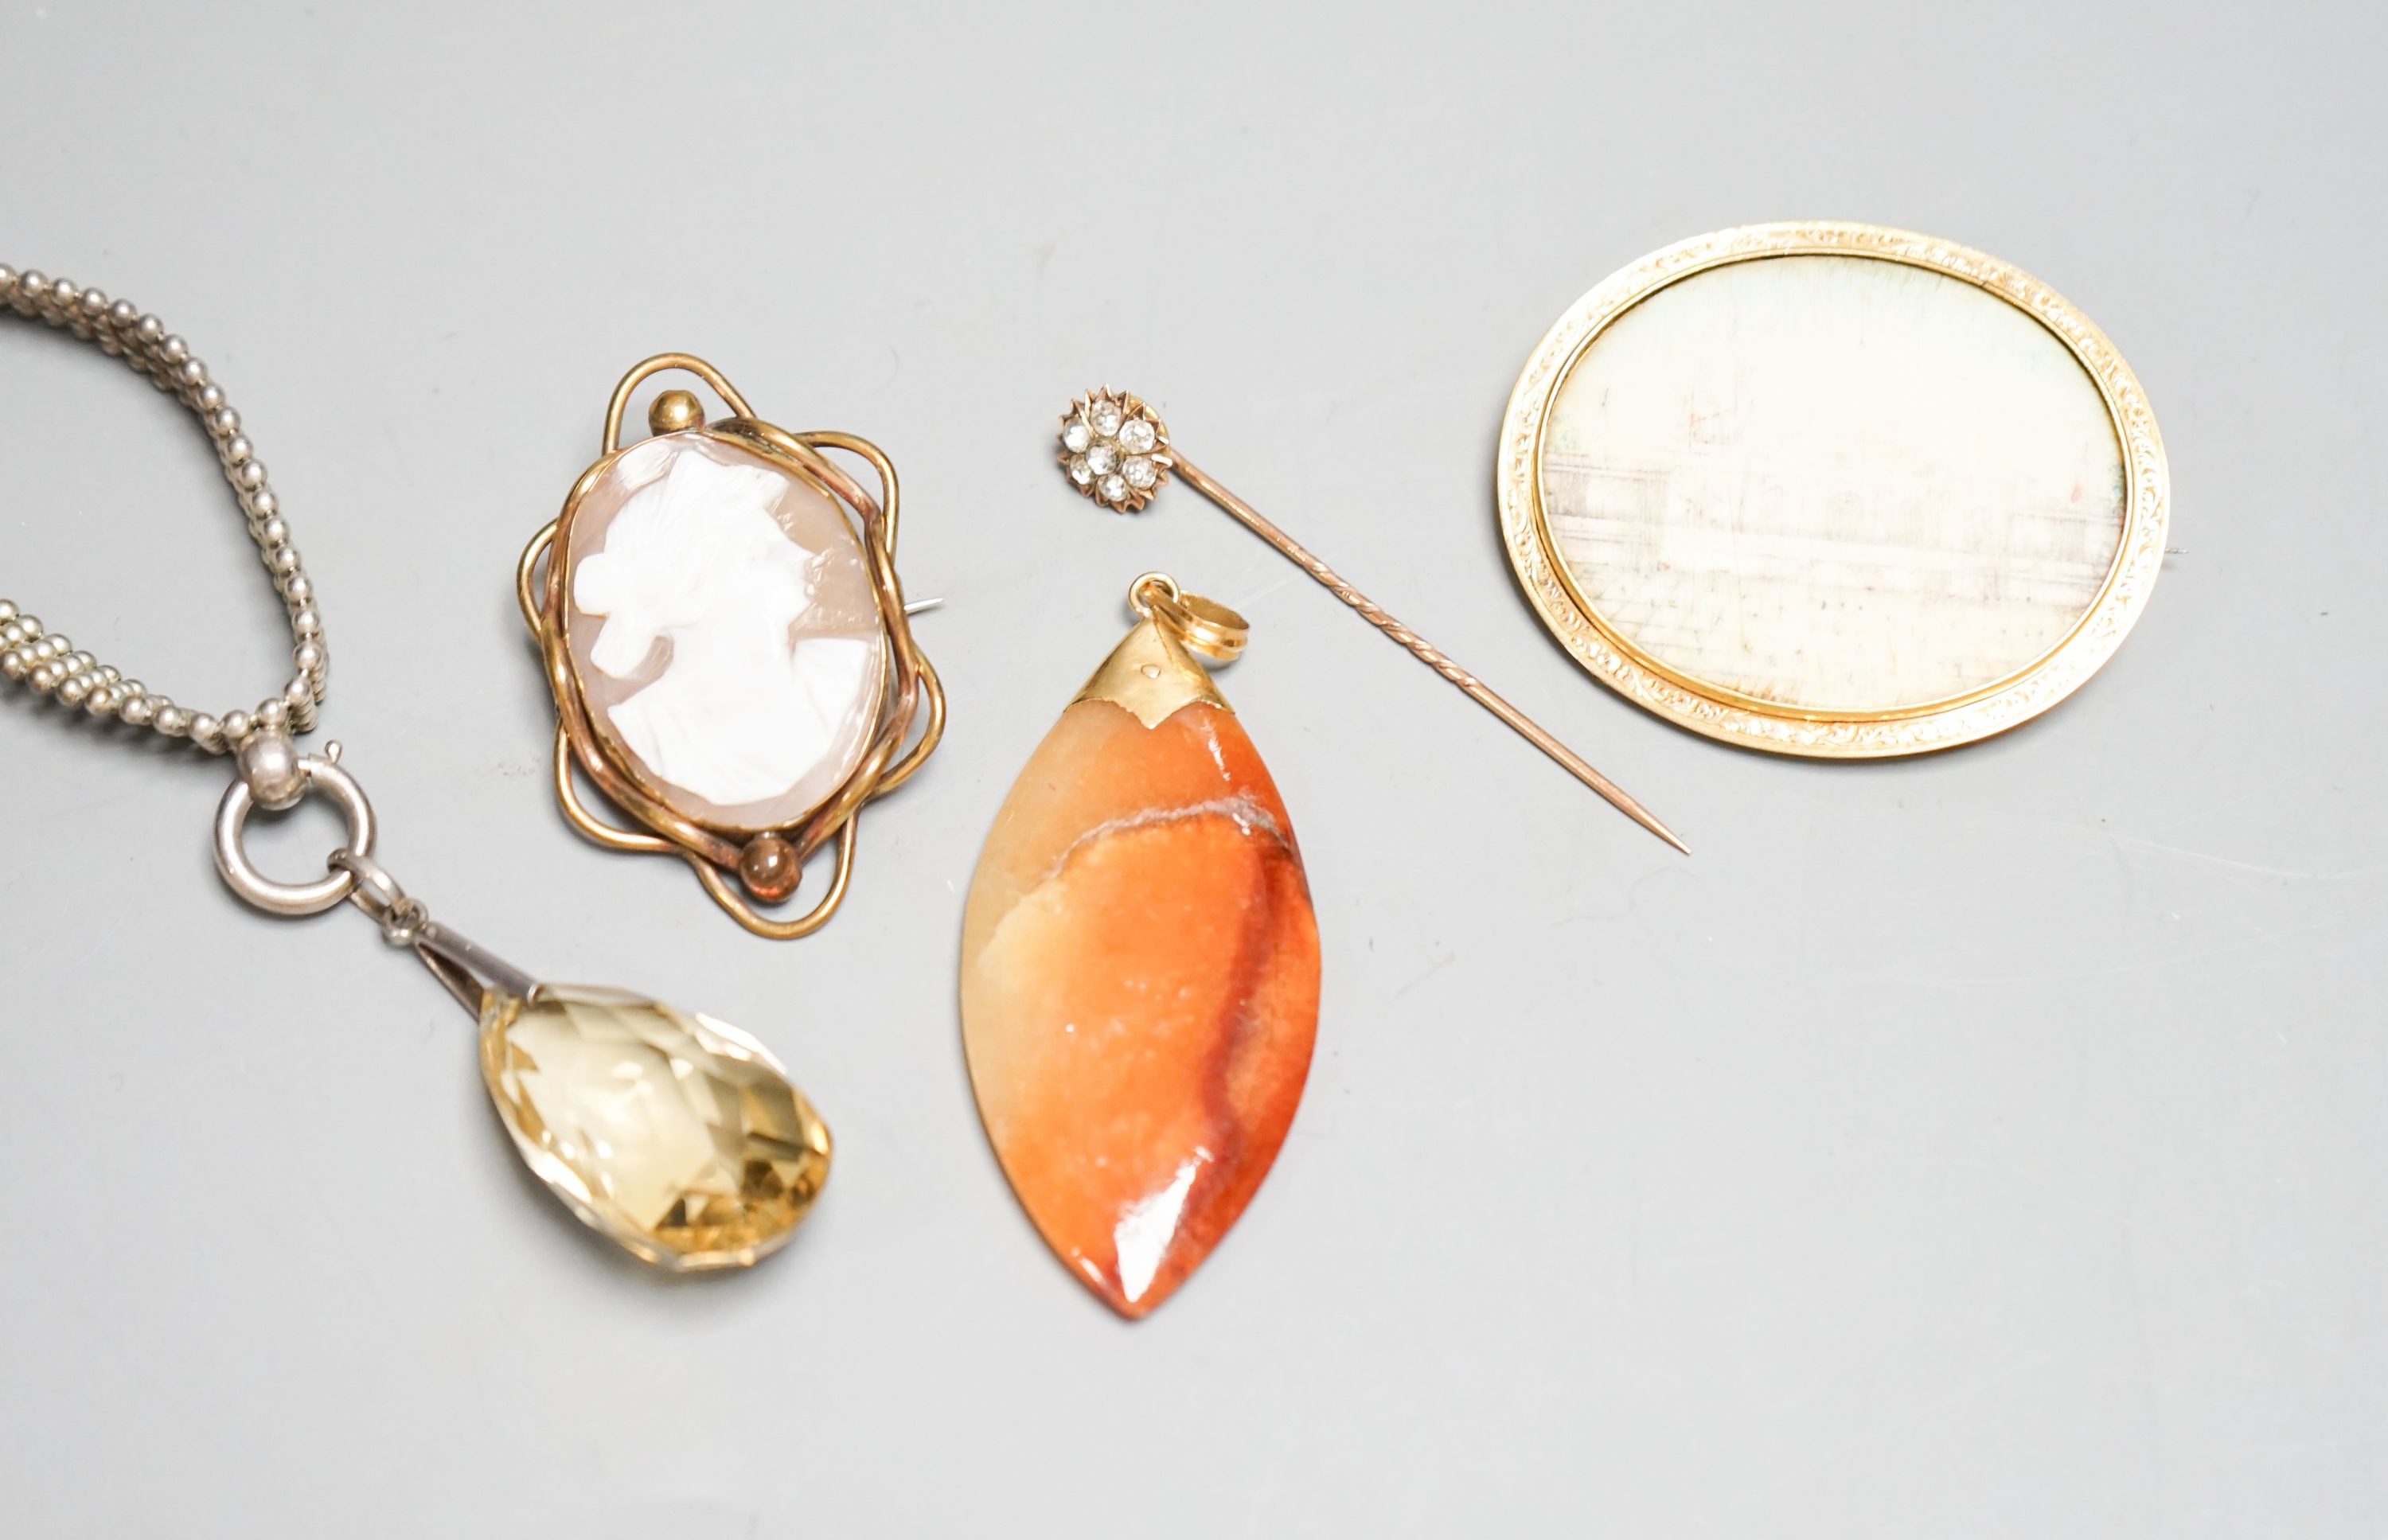 Mixed jewellery including cameo brooch, agate pendant, oval brooch, paste set stick pin and pendant on white metal chain.